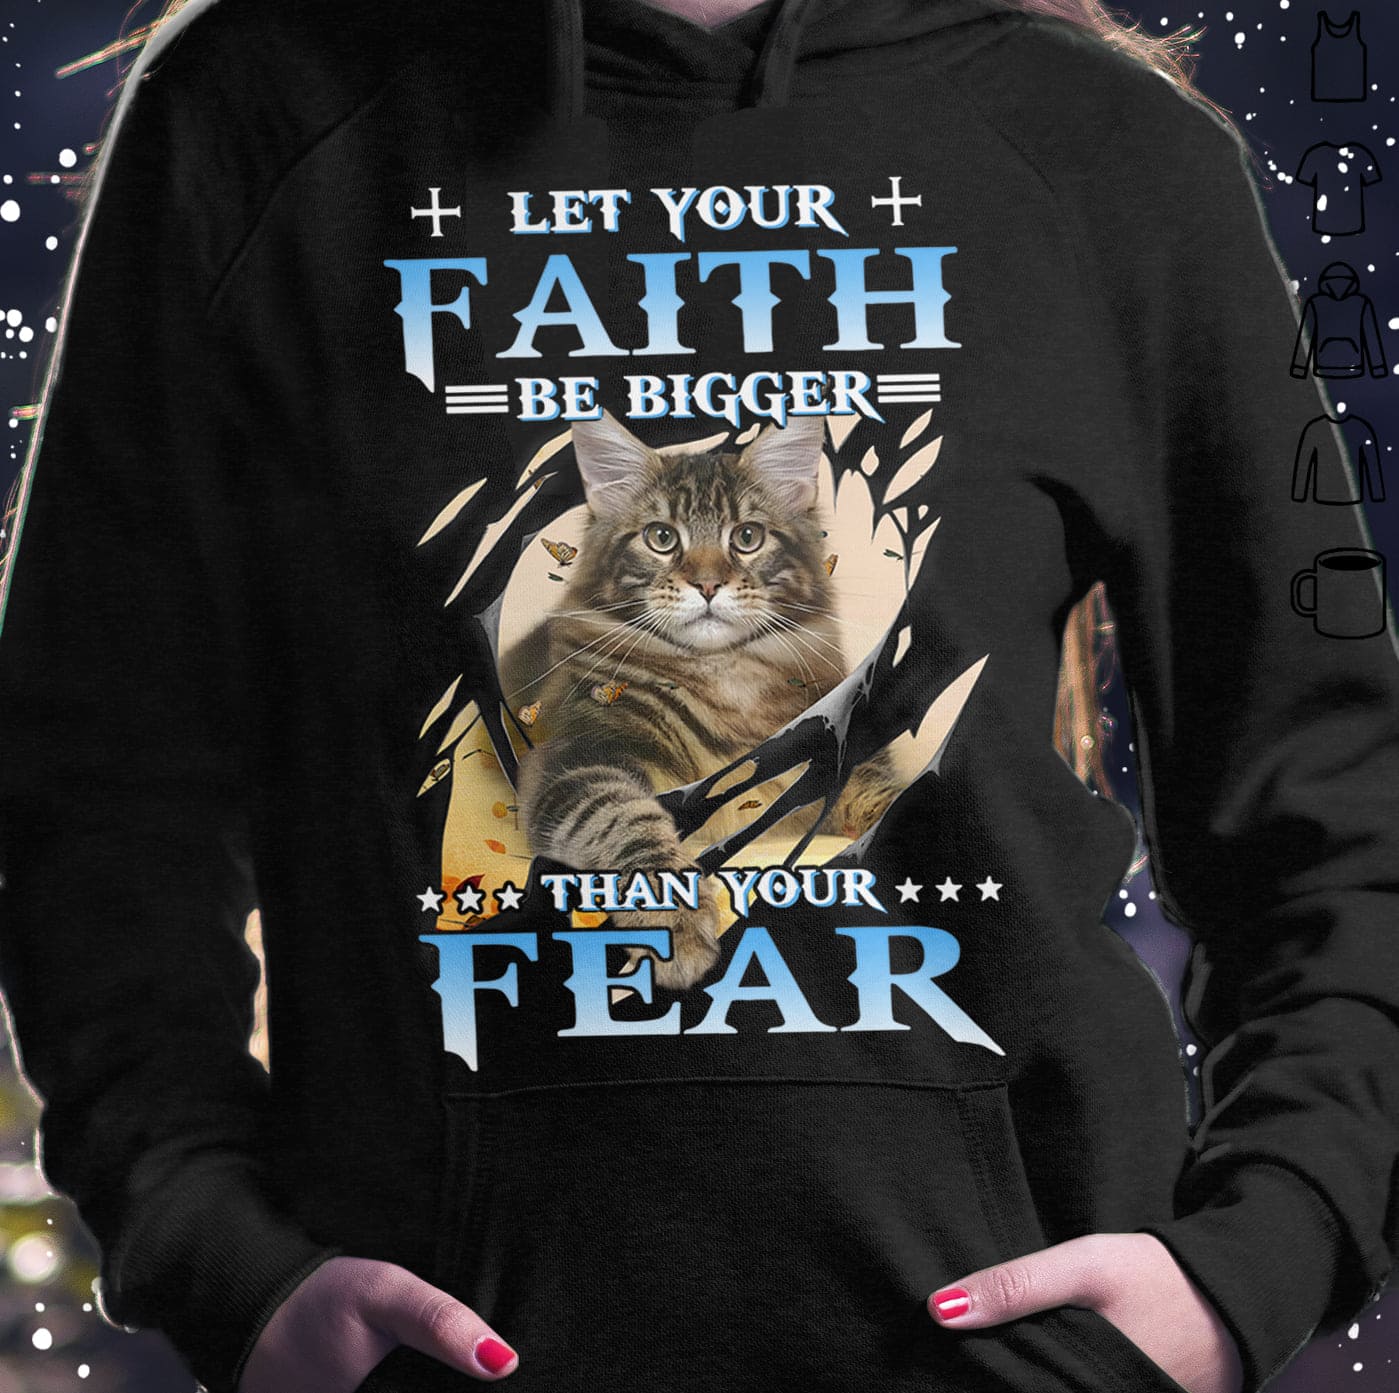 Let your faith be bigger than your fear - Jesus faith, Believe in Jesus, Gift for cat lover